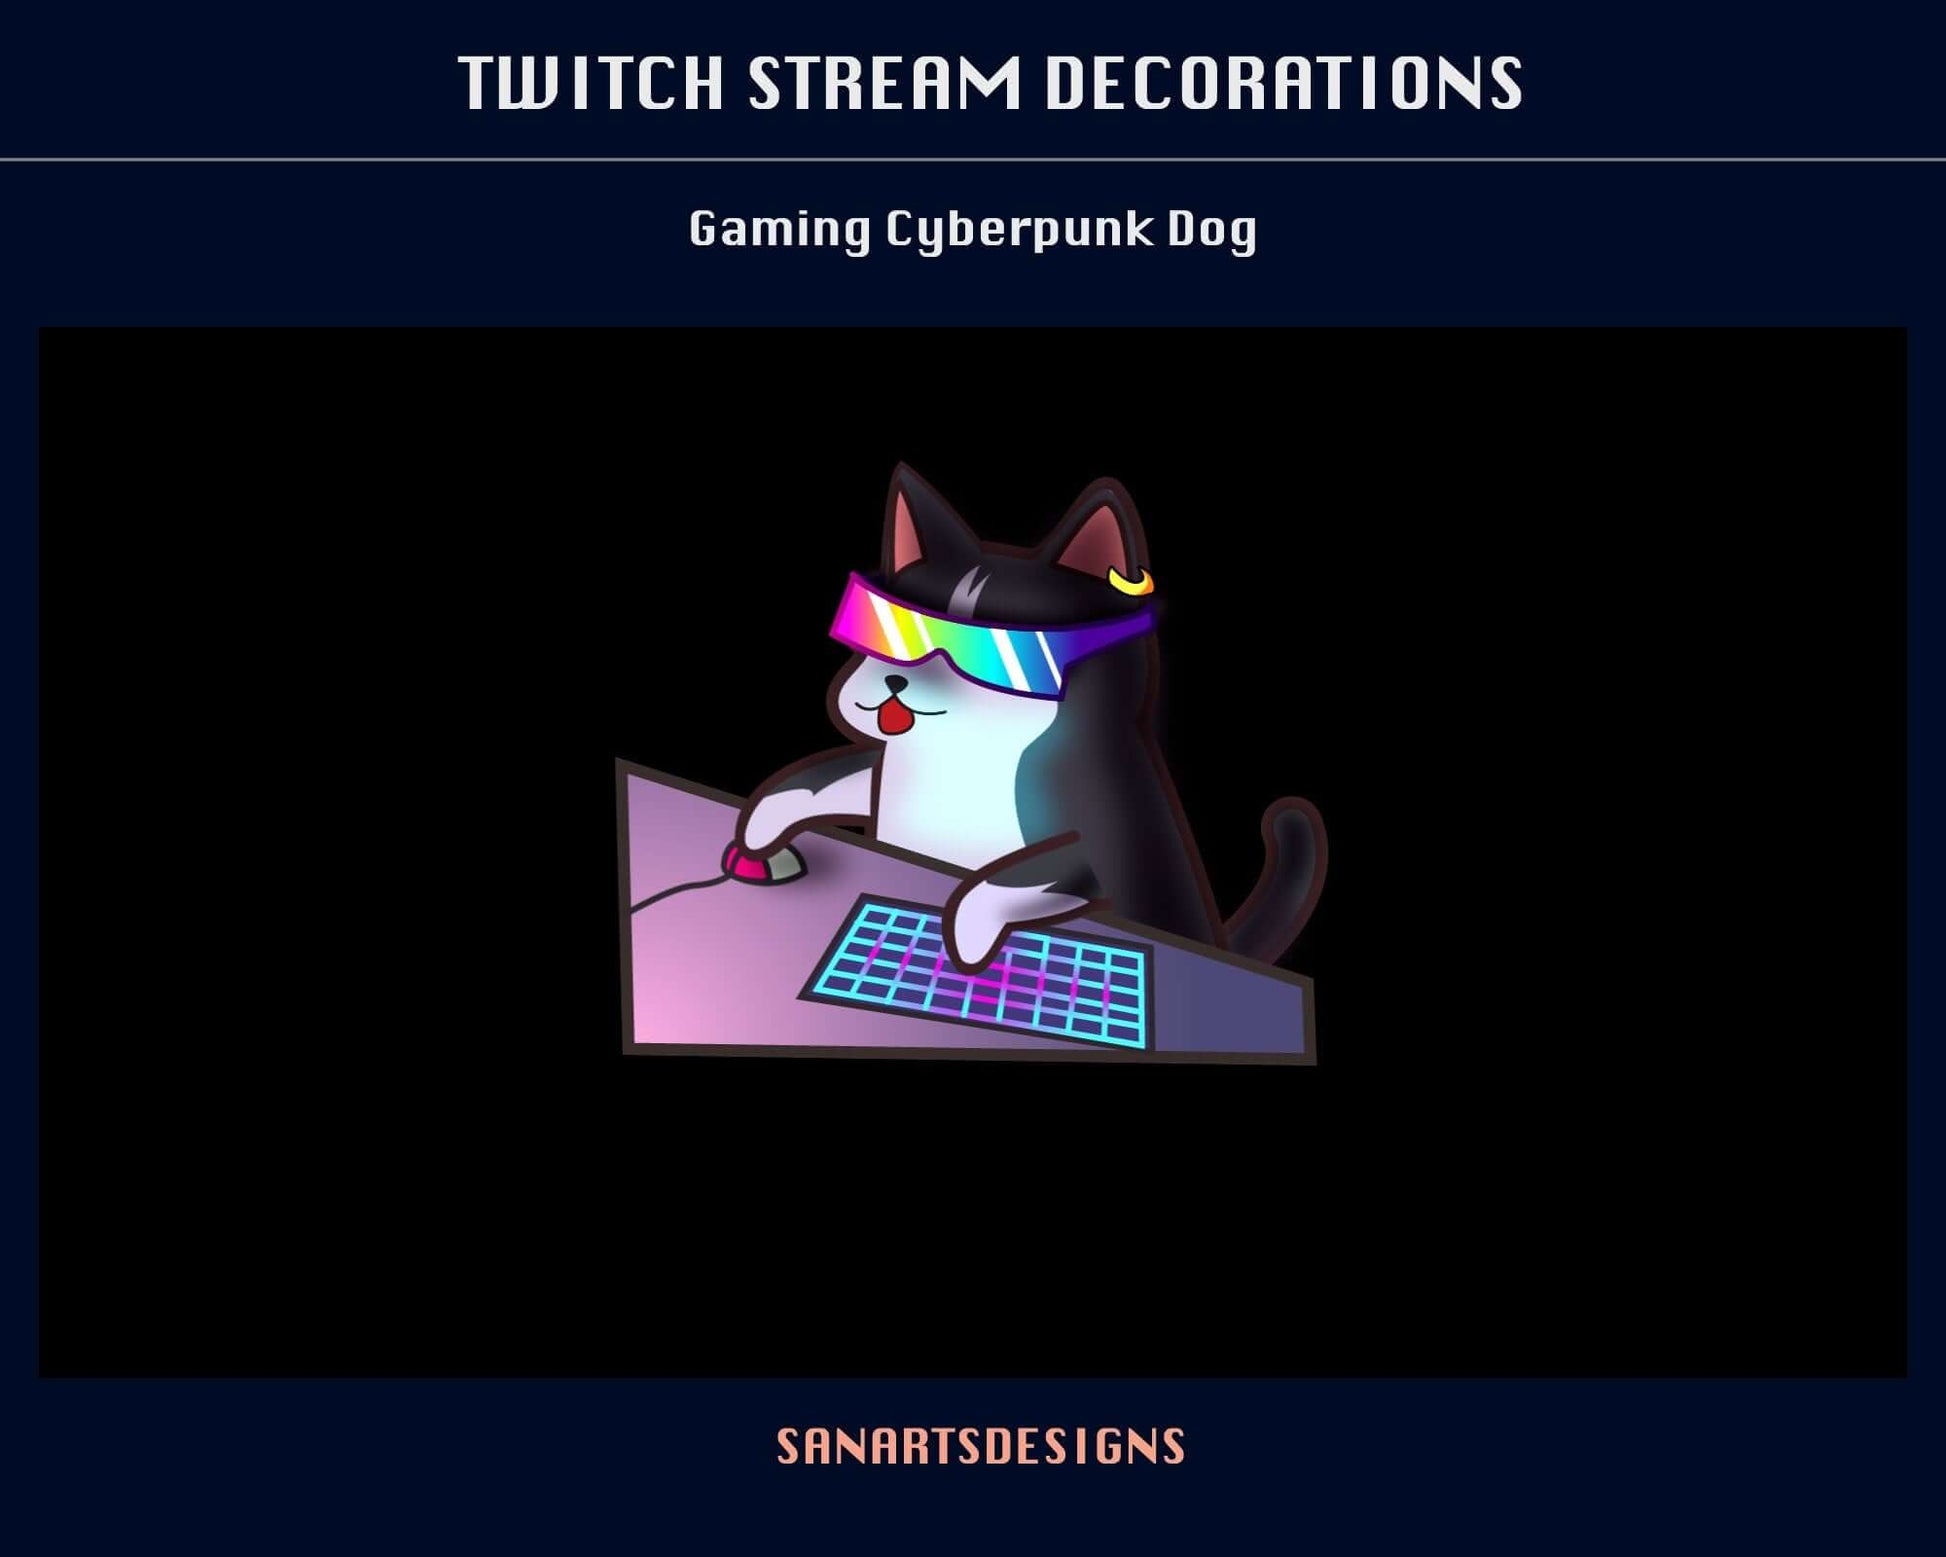 Cute Gaming Cyber Dog Animated Stream Decorations - Decorations - Stream K-Arts